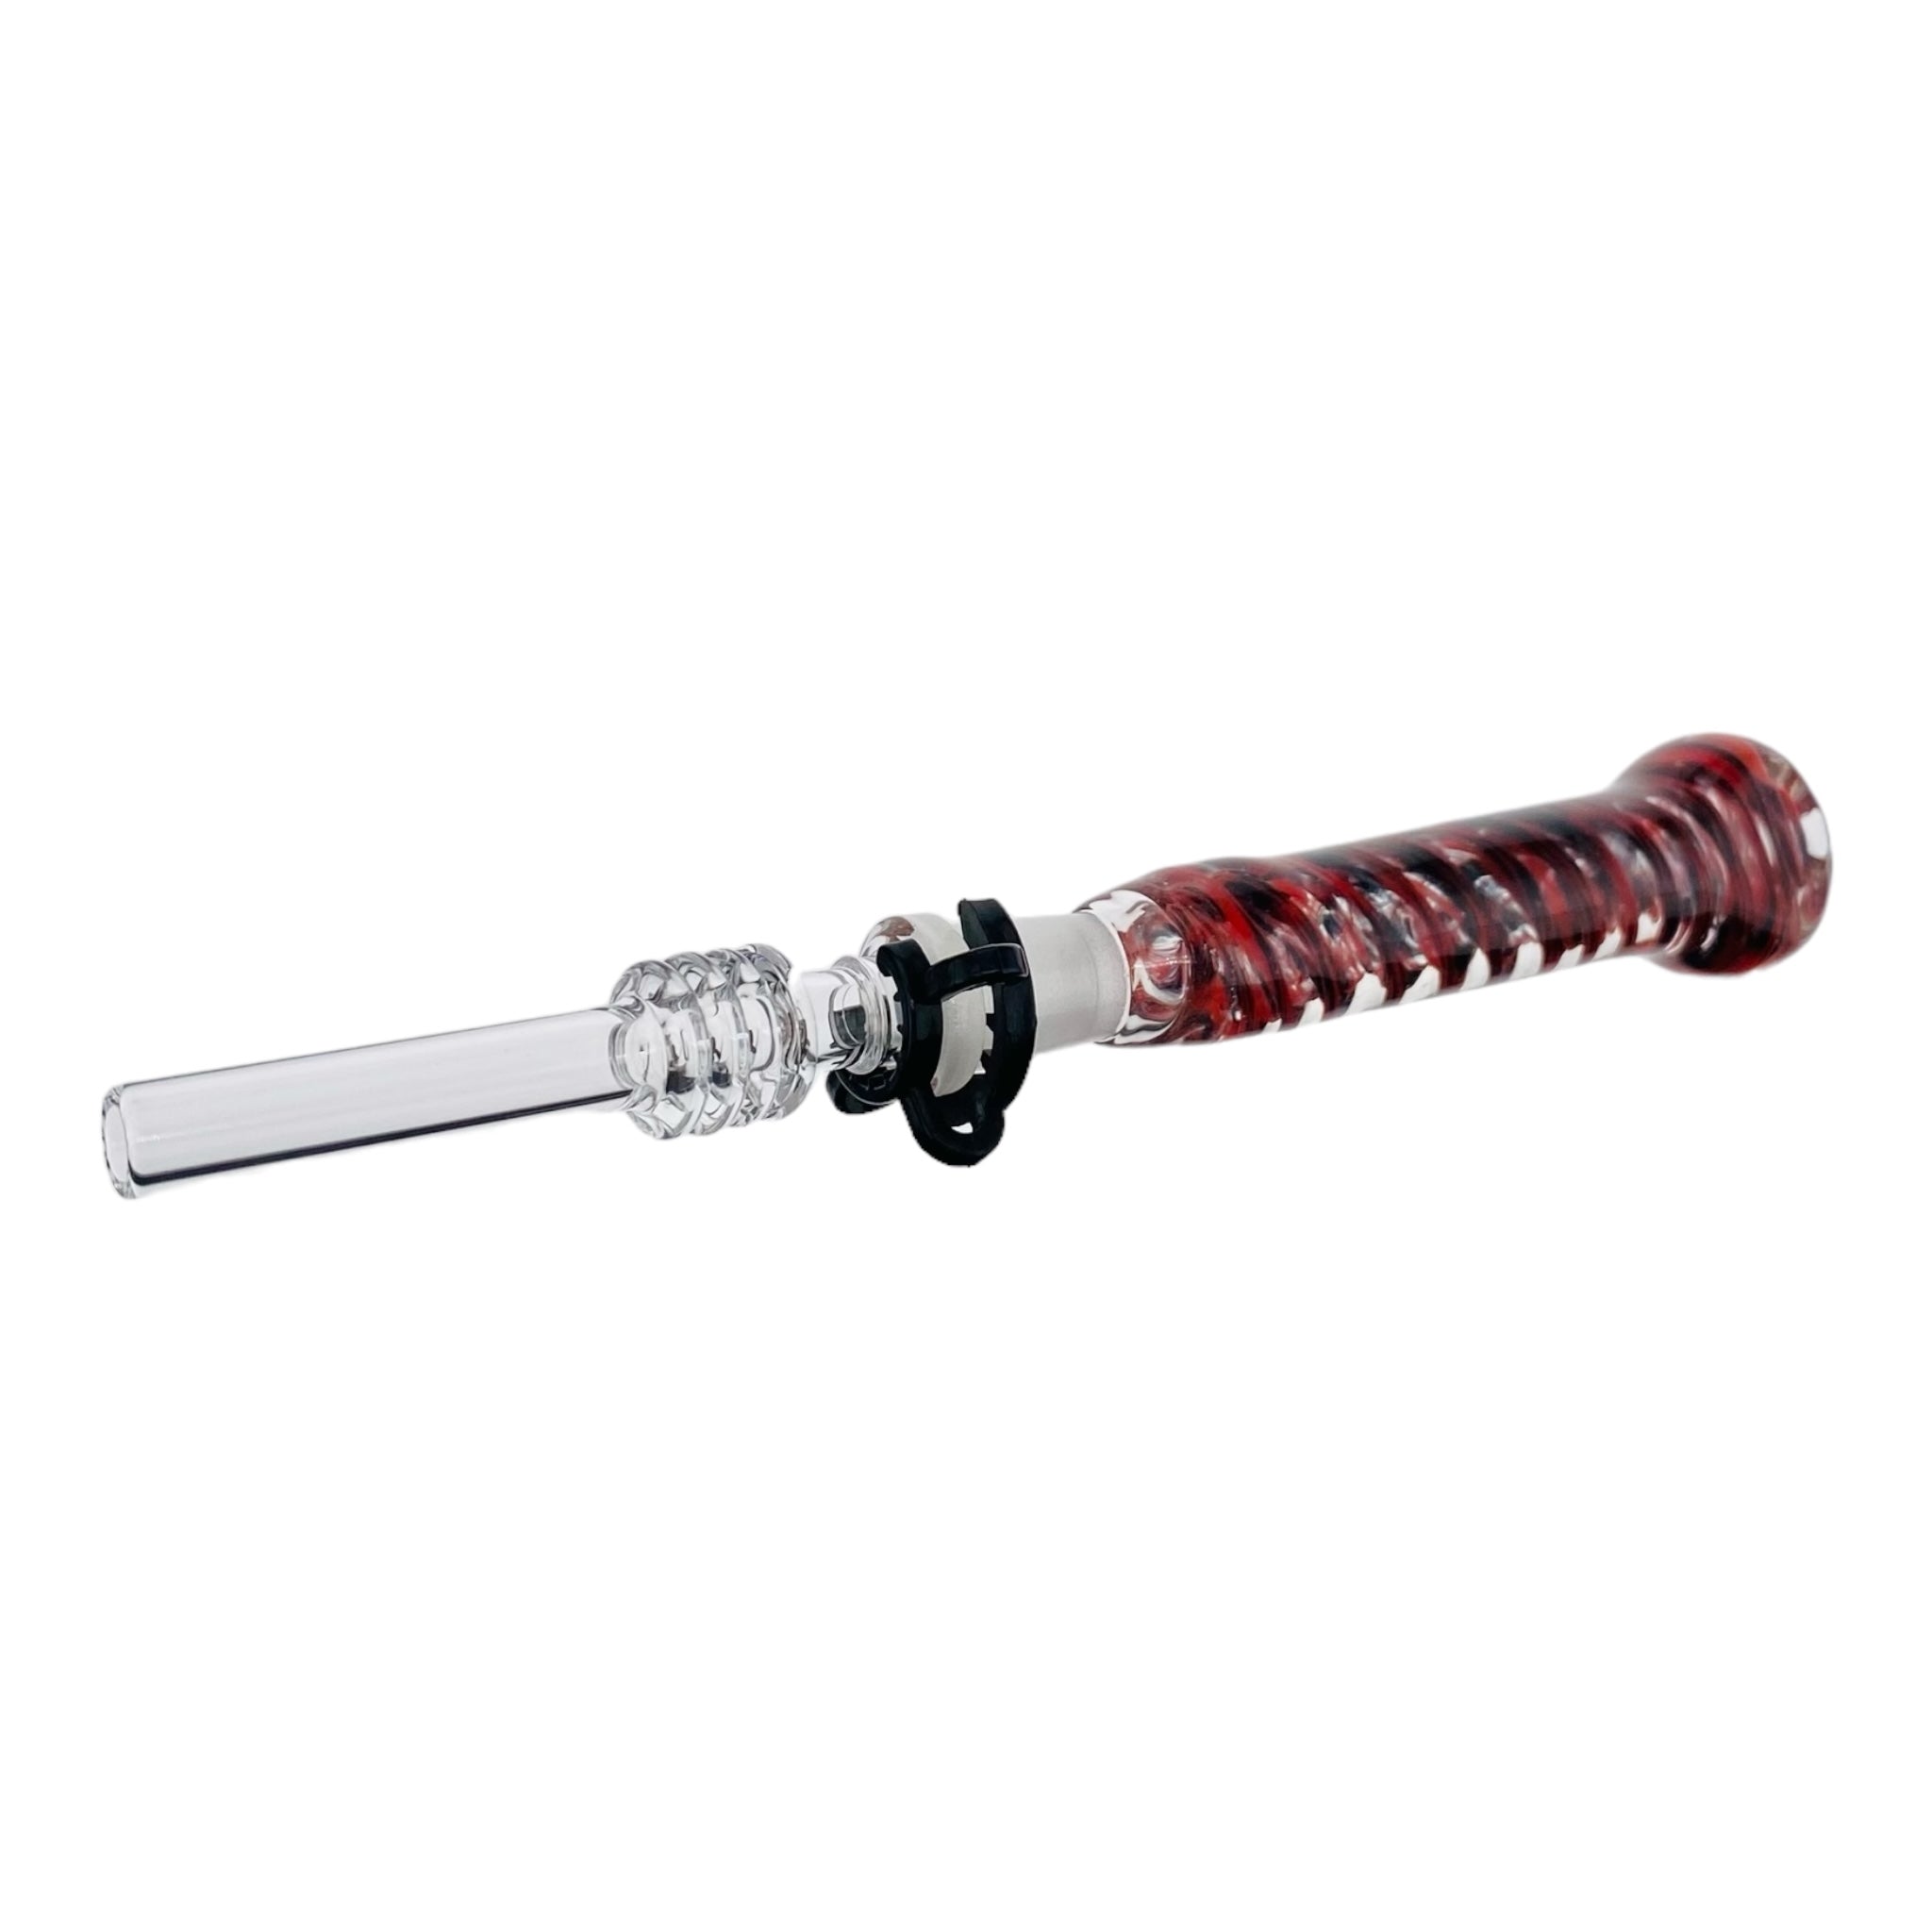 10mm Nectar Collector - Red And Black Inside Out With 10mm Quartz Tip